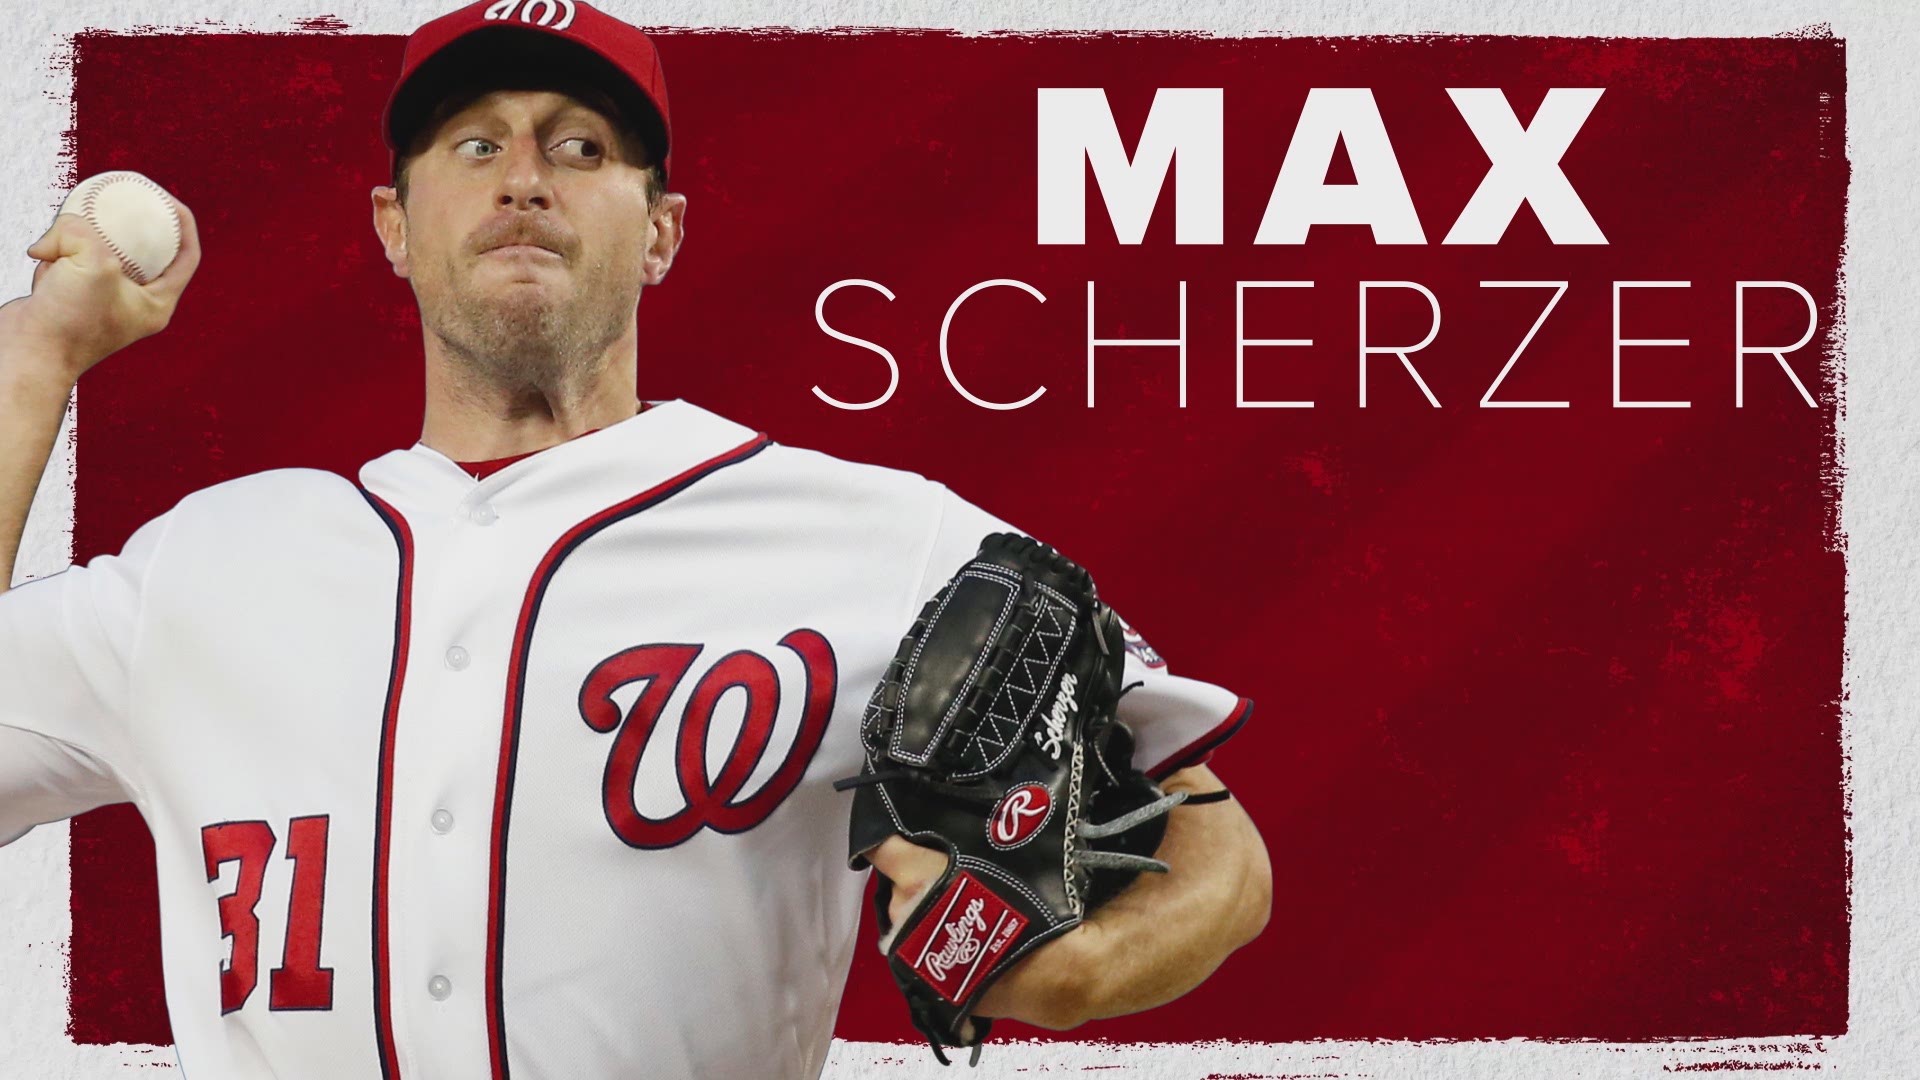 Max Scherzer has won multiple Cy Young Awards throughout his career